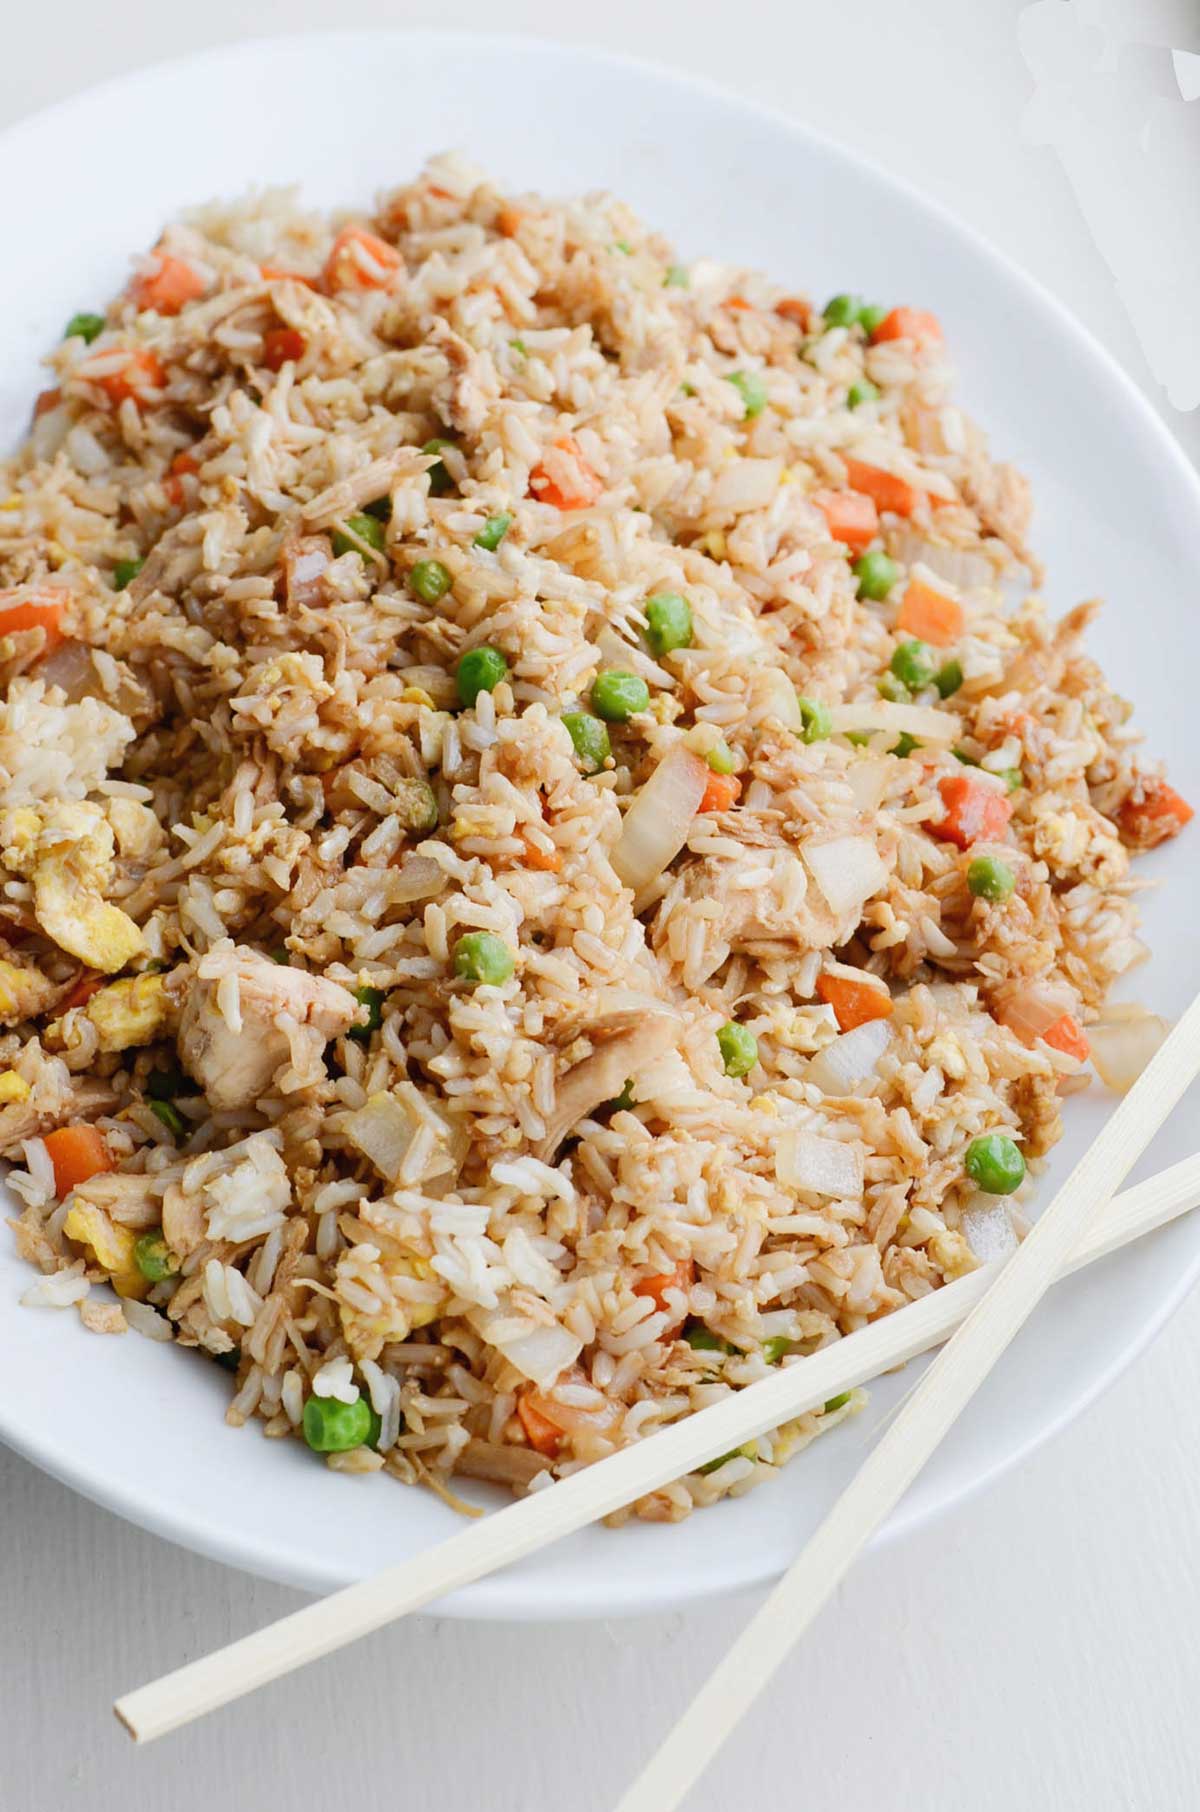 Better Than Takeout Chicken Fried Rice